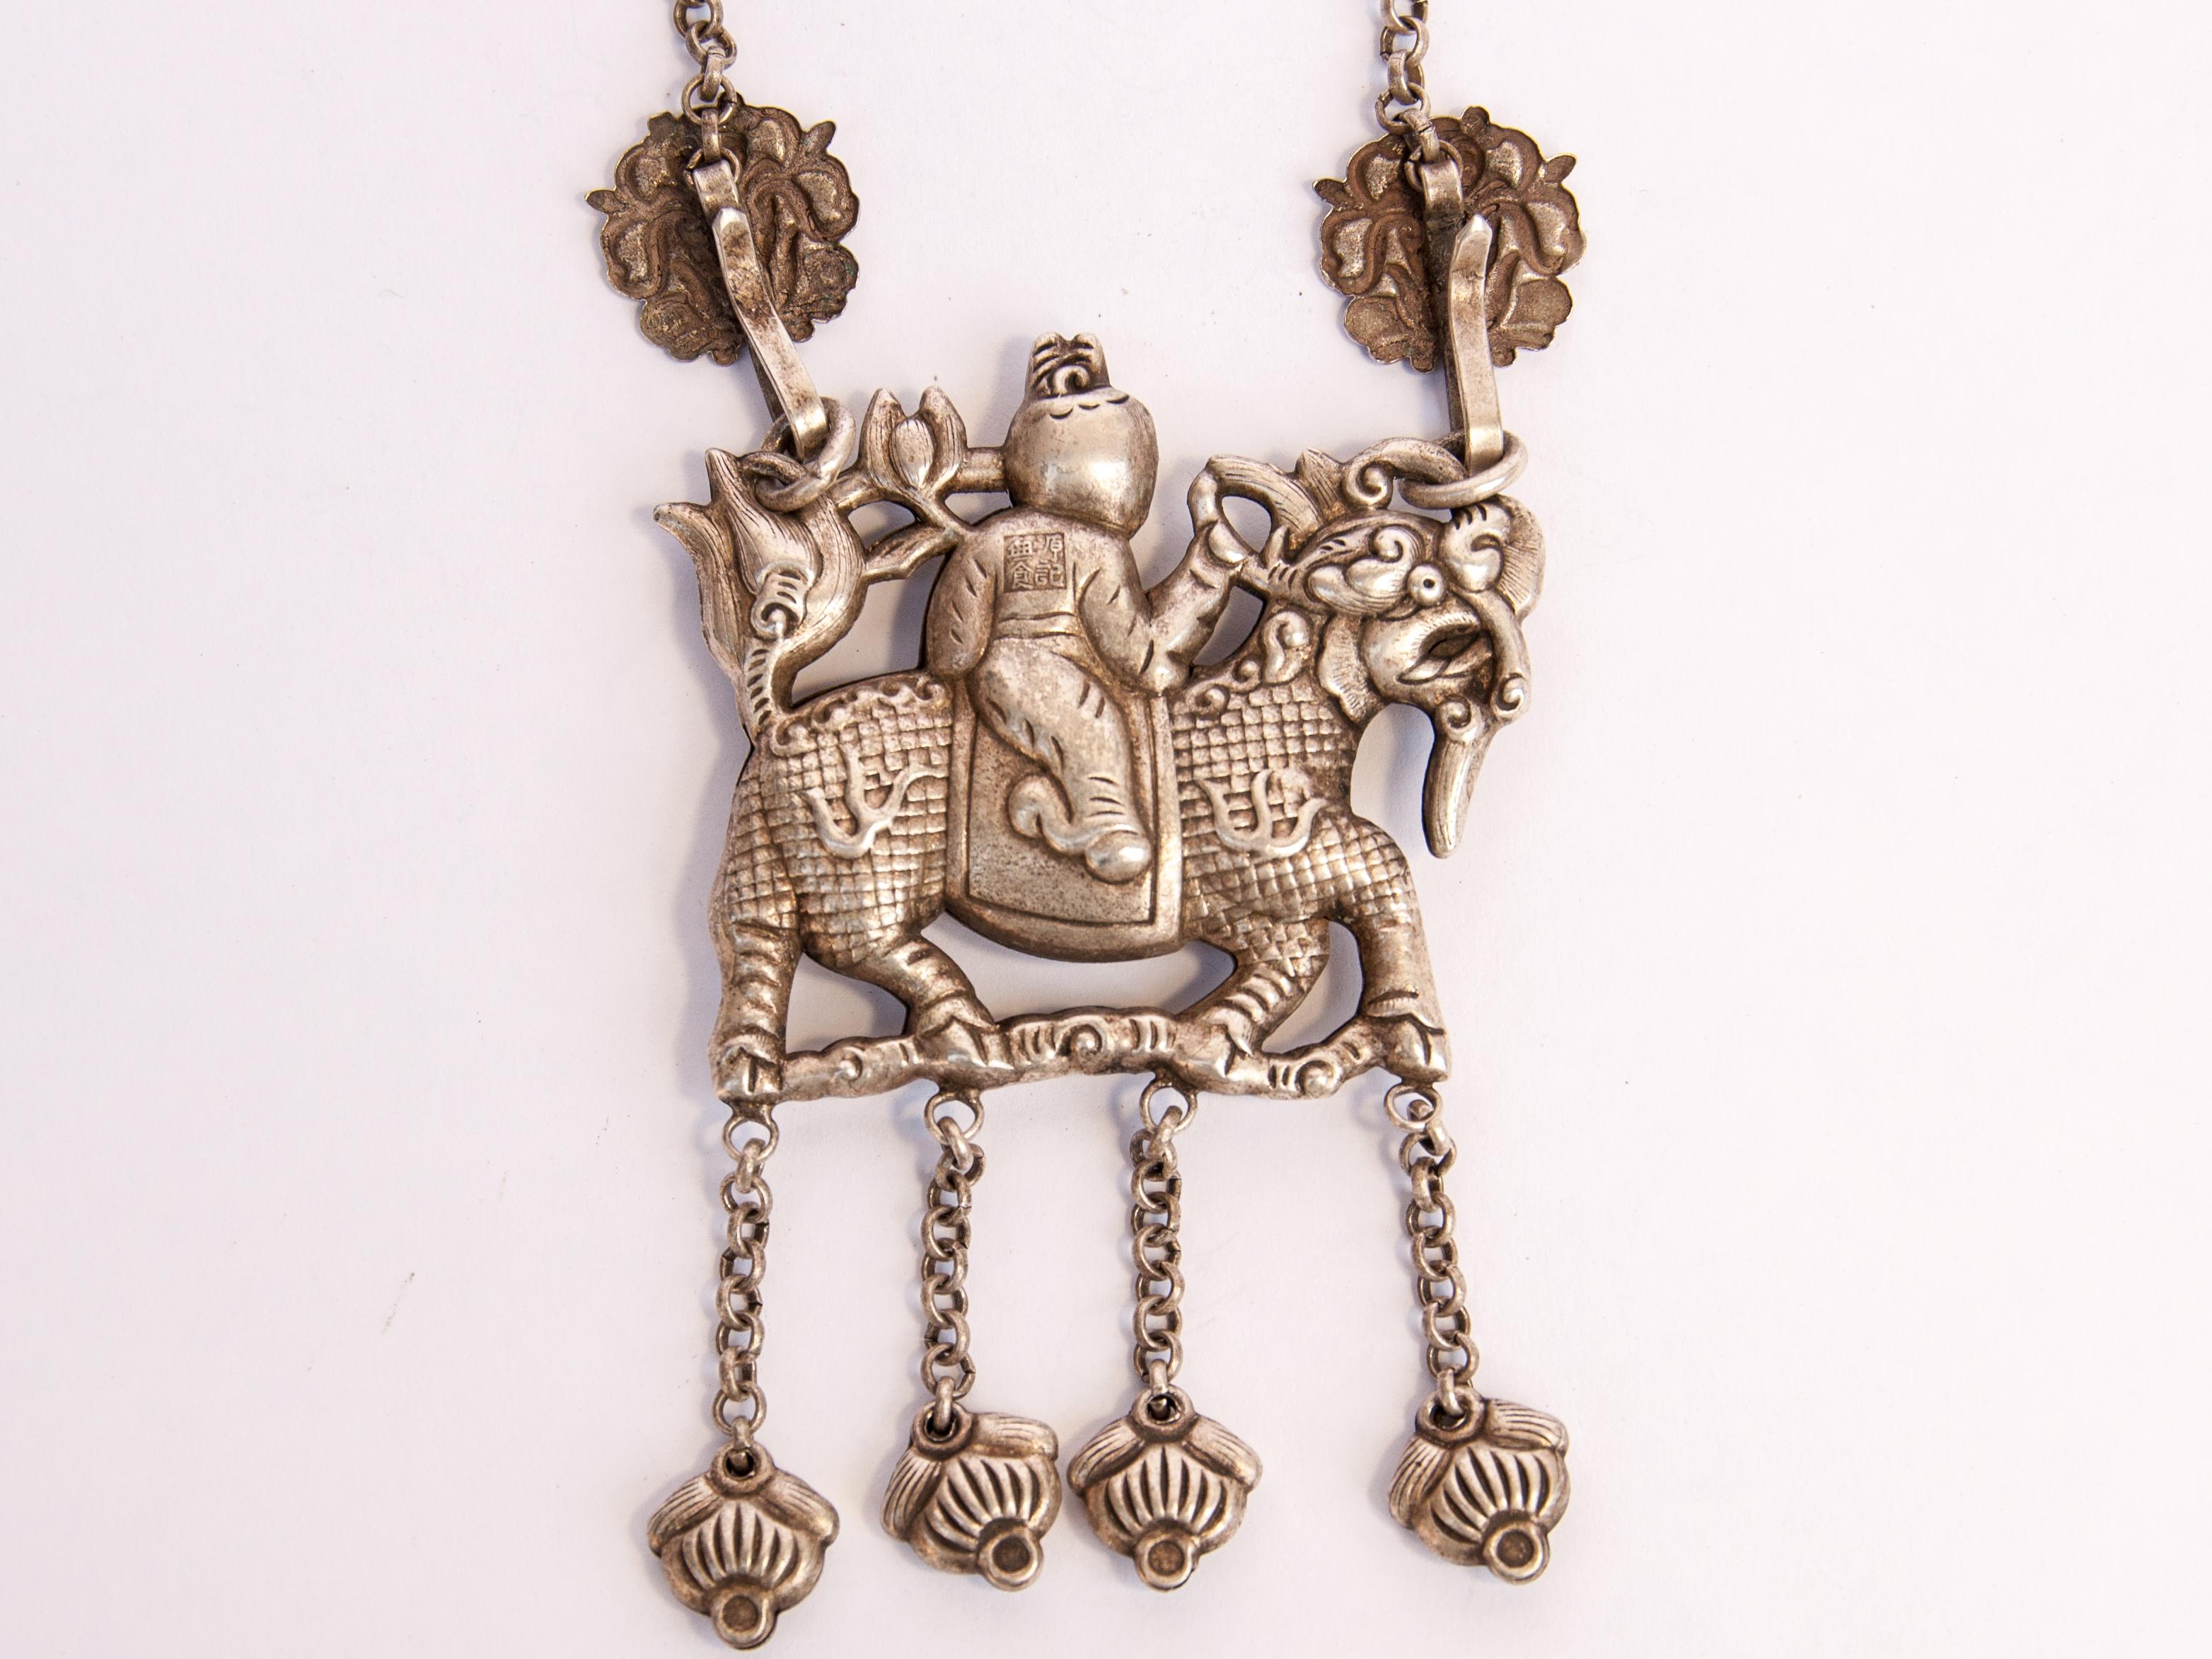 Metal Qilin Amulet Necklace, Silver Alloy, Southwest China, Early 20th Century